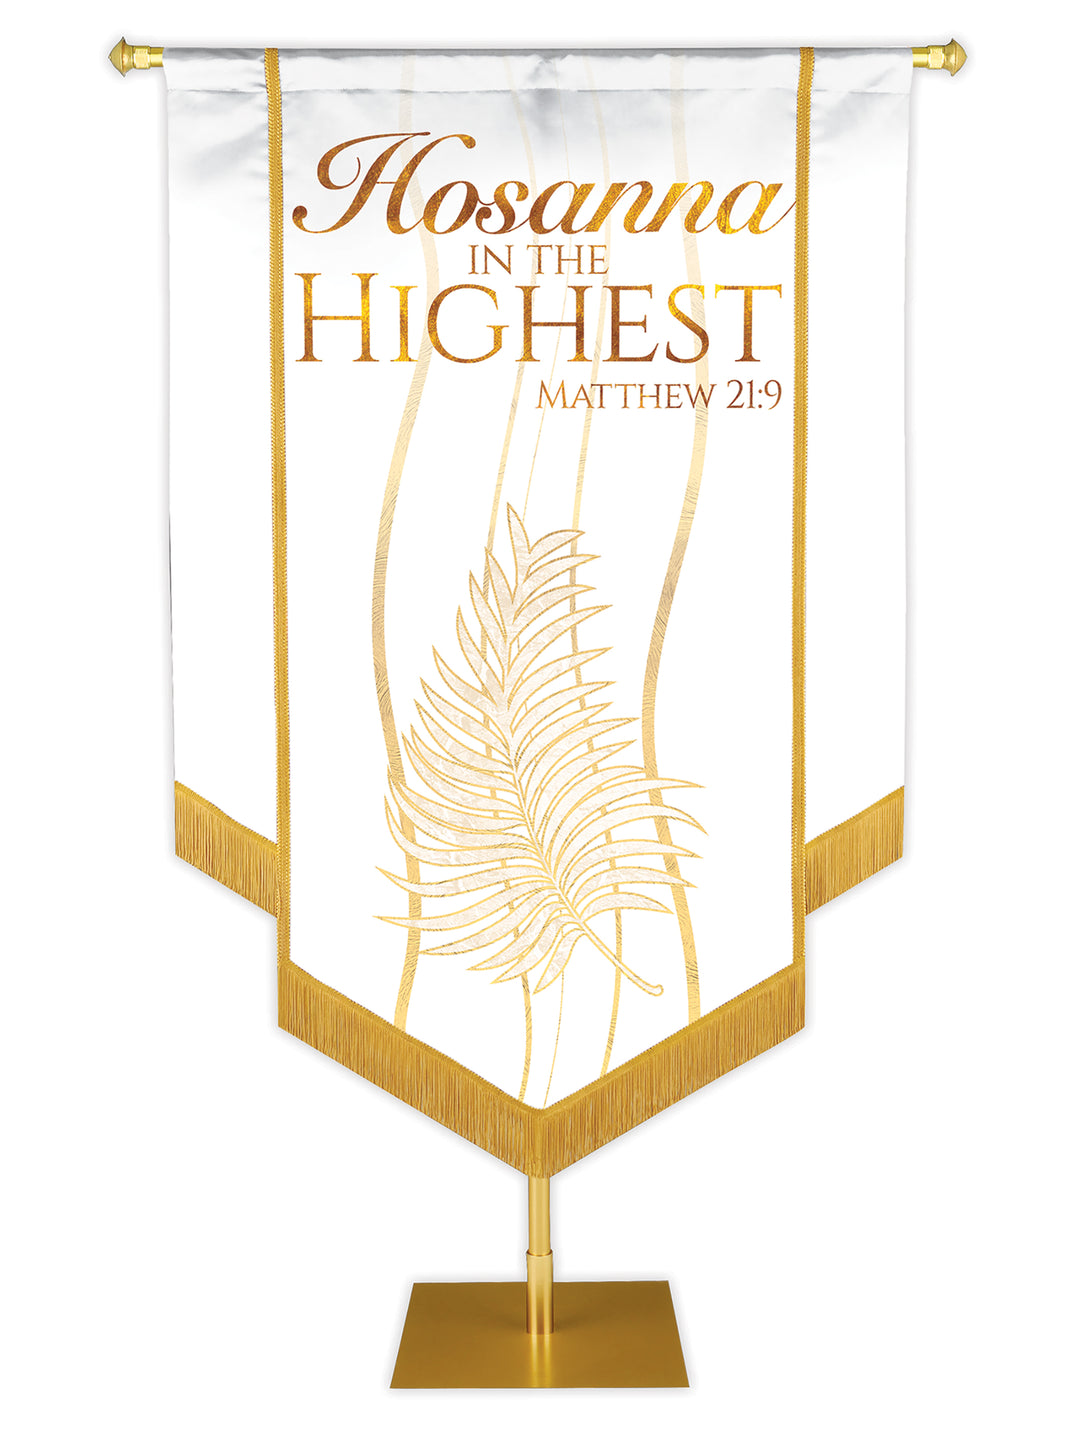 Experiencing God Palm, Hosanna In The Highest Embellished Banner - Handcrafted Banners - PraiseBanners